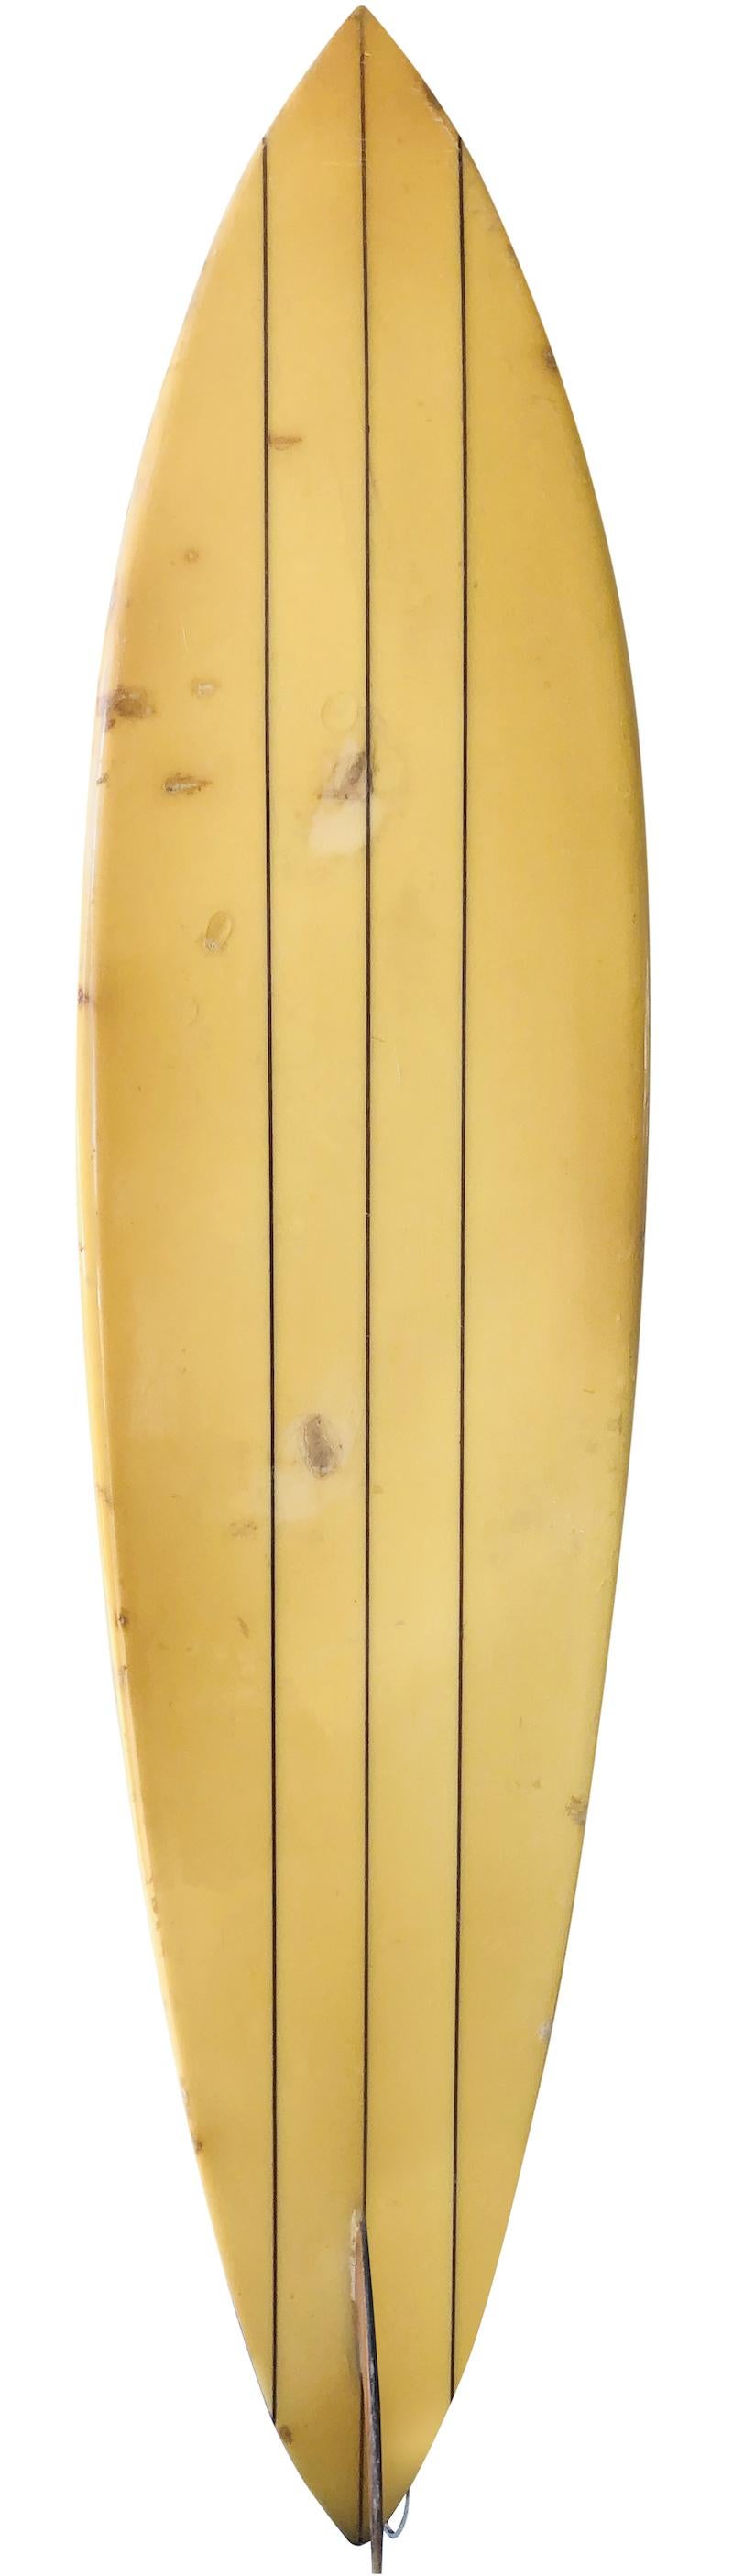 Mid-1970s Dick Brewer shaped single fin surfboard. Features a pintail shape with redwood triple stringer and glassed on redwood single fin. This vintage surfboard remains in all original condition.

Dick Brewer is a world famous Pioneer surfboard